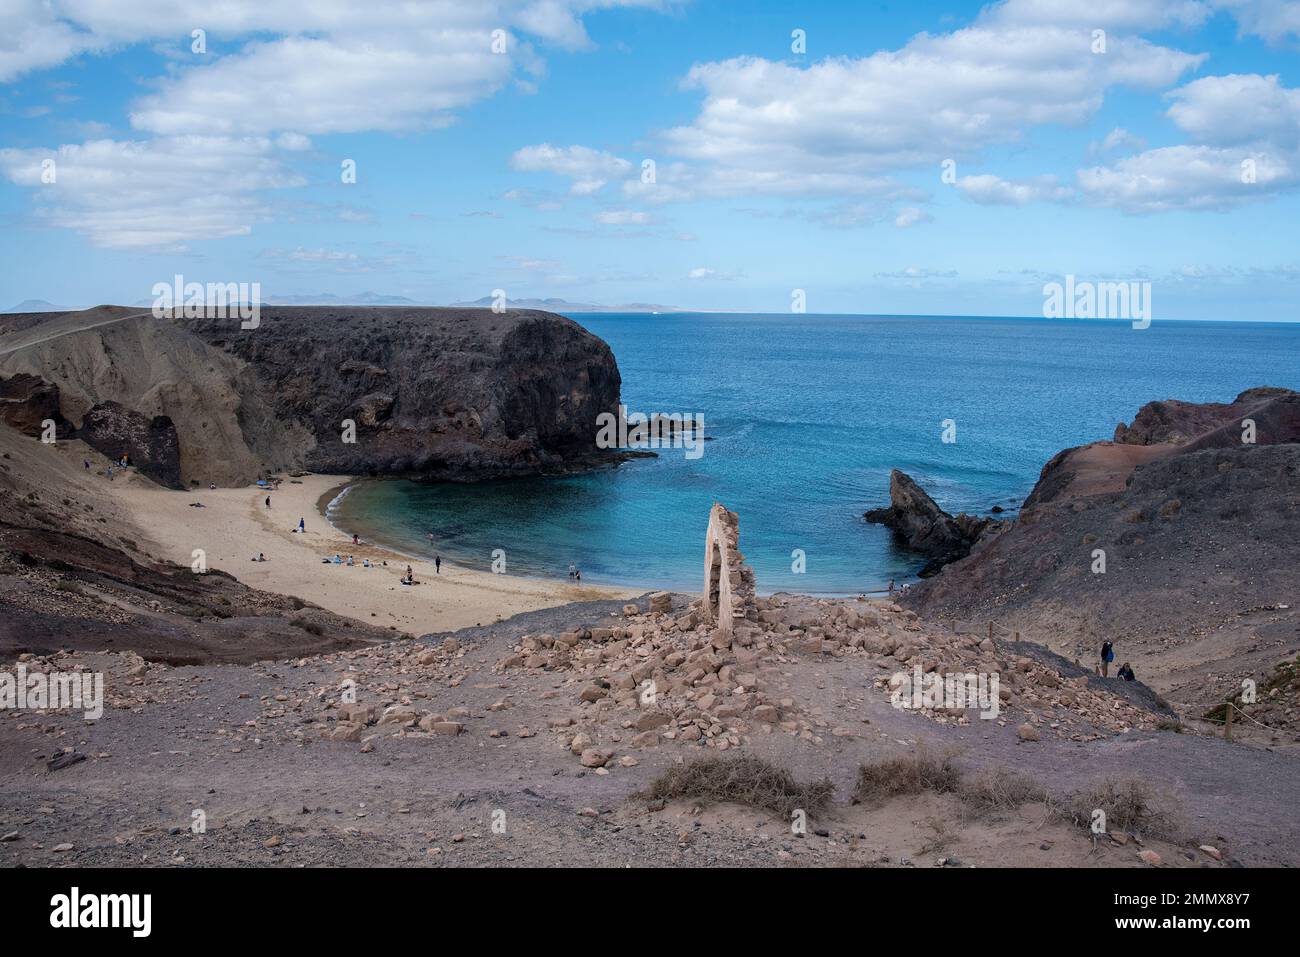 Panoramic view on the Playas de Papagayo, papagayo Beach, Canary Islands, Lanzarote, looking out to Atlantic Ocean. Stock Photo